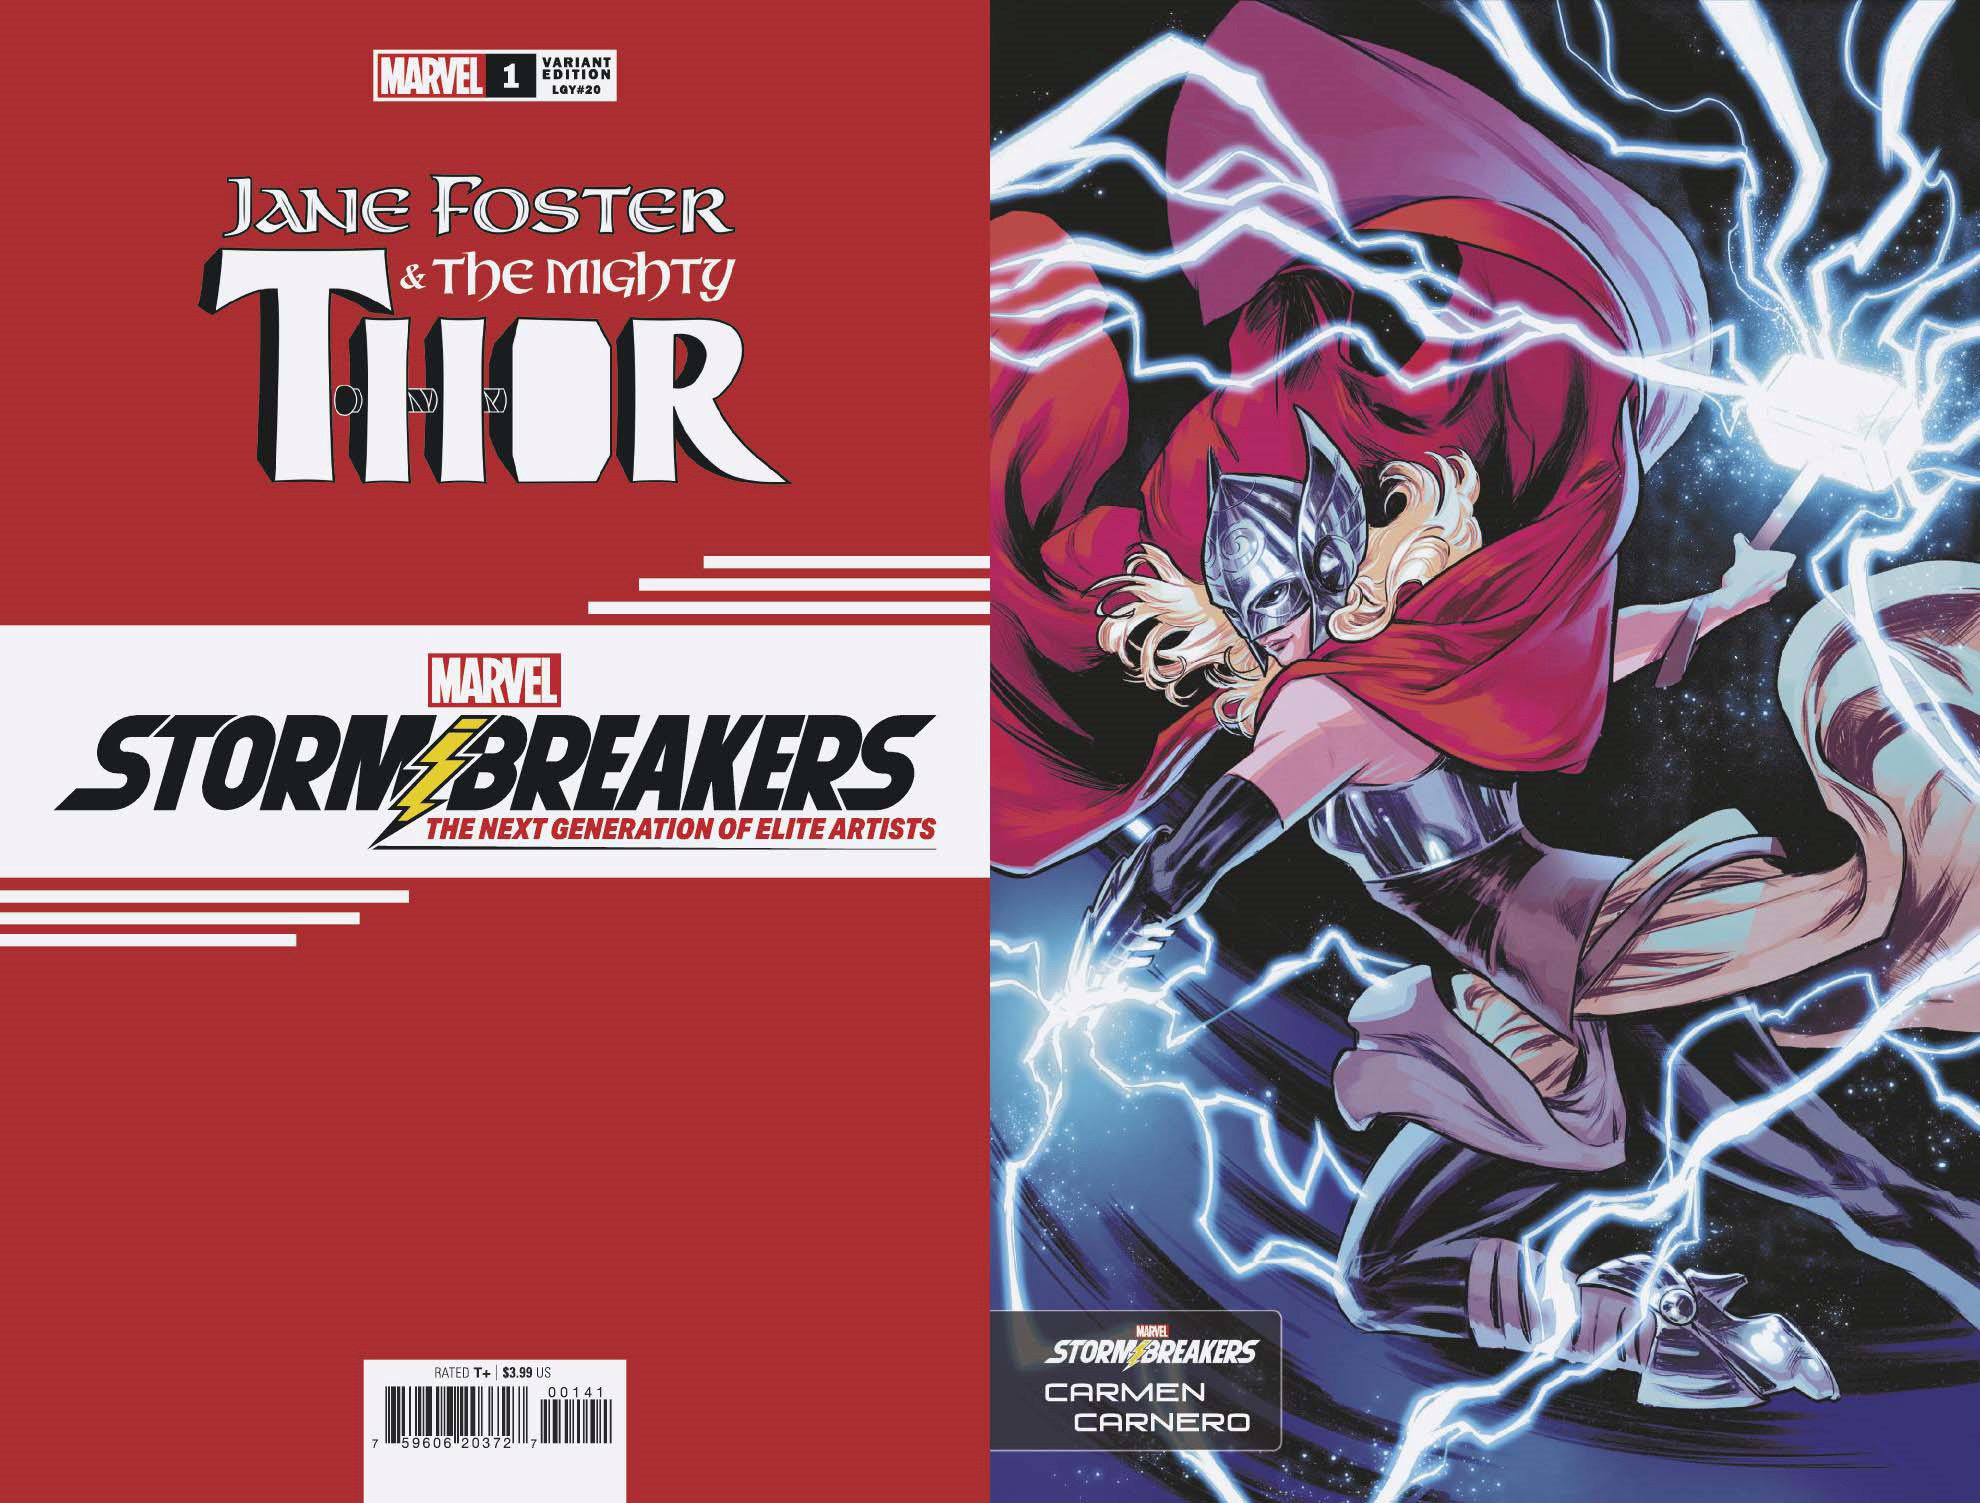 Jane Foster & The Mighty Thor #1 Carnero Stormbreakers Variant (Of 5)